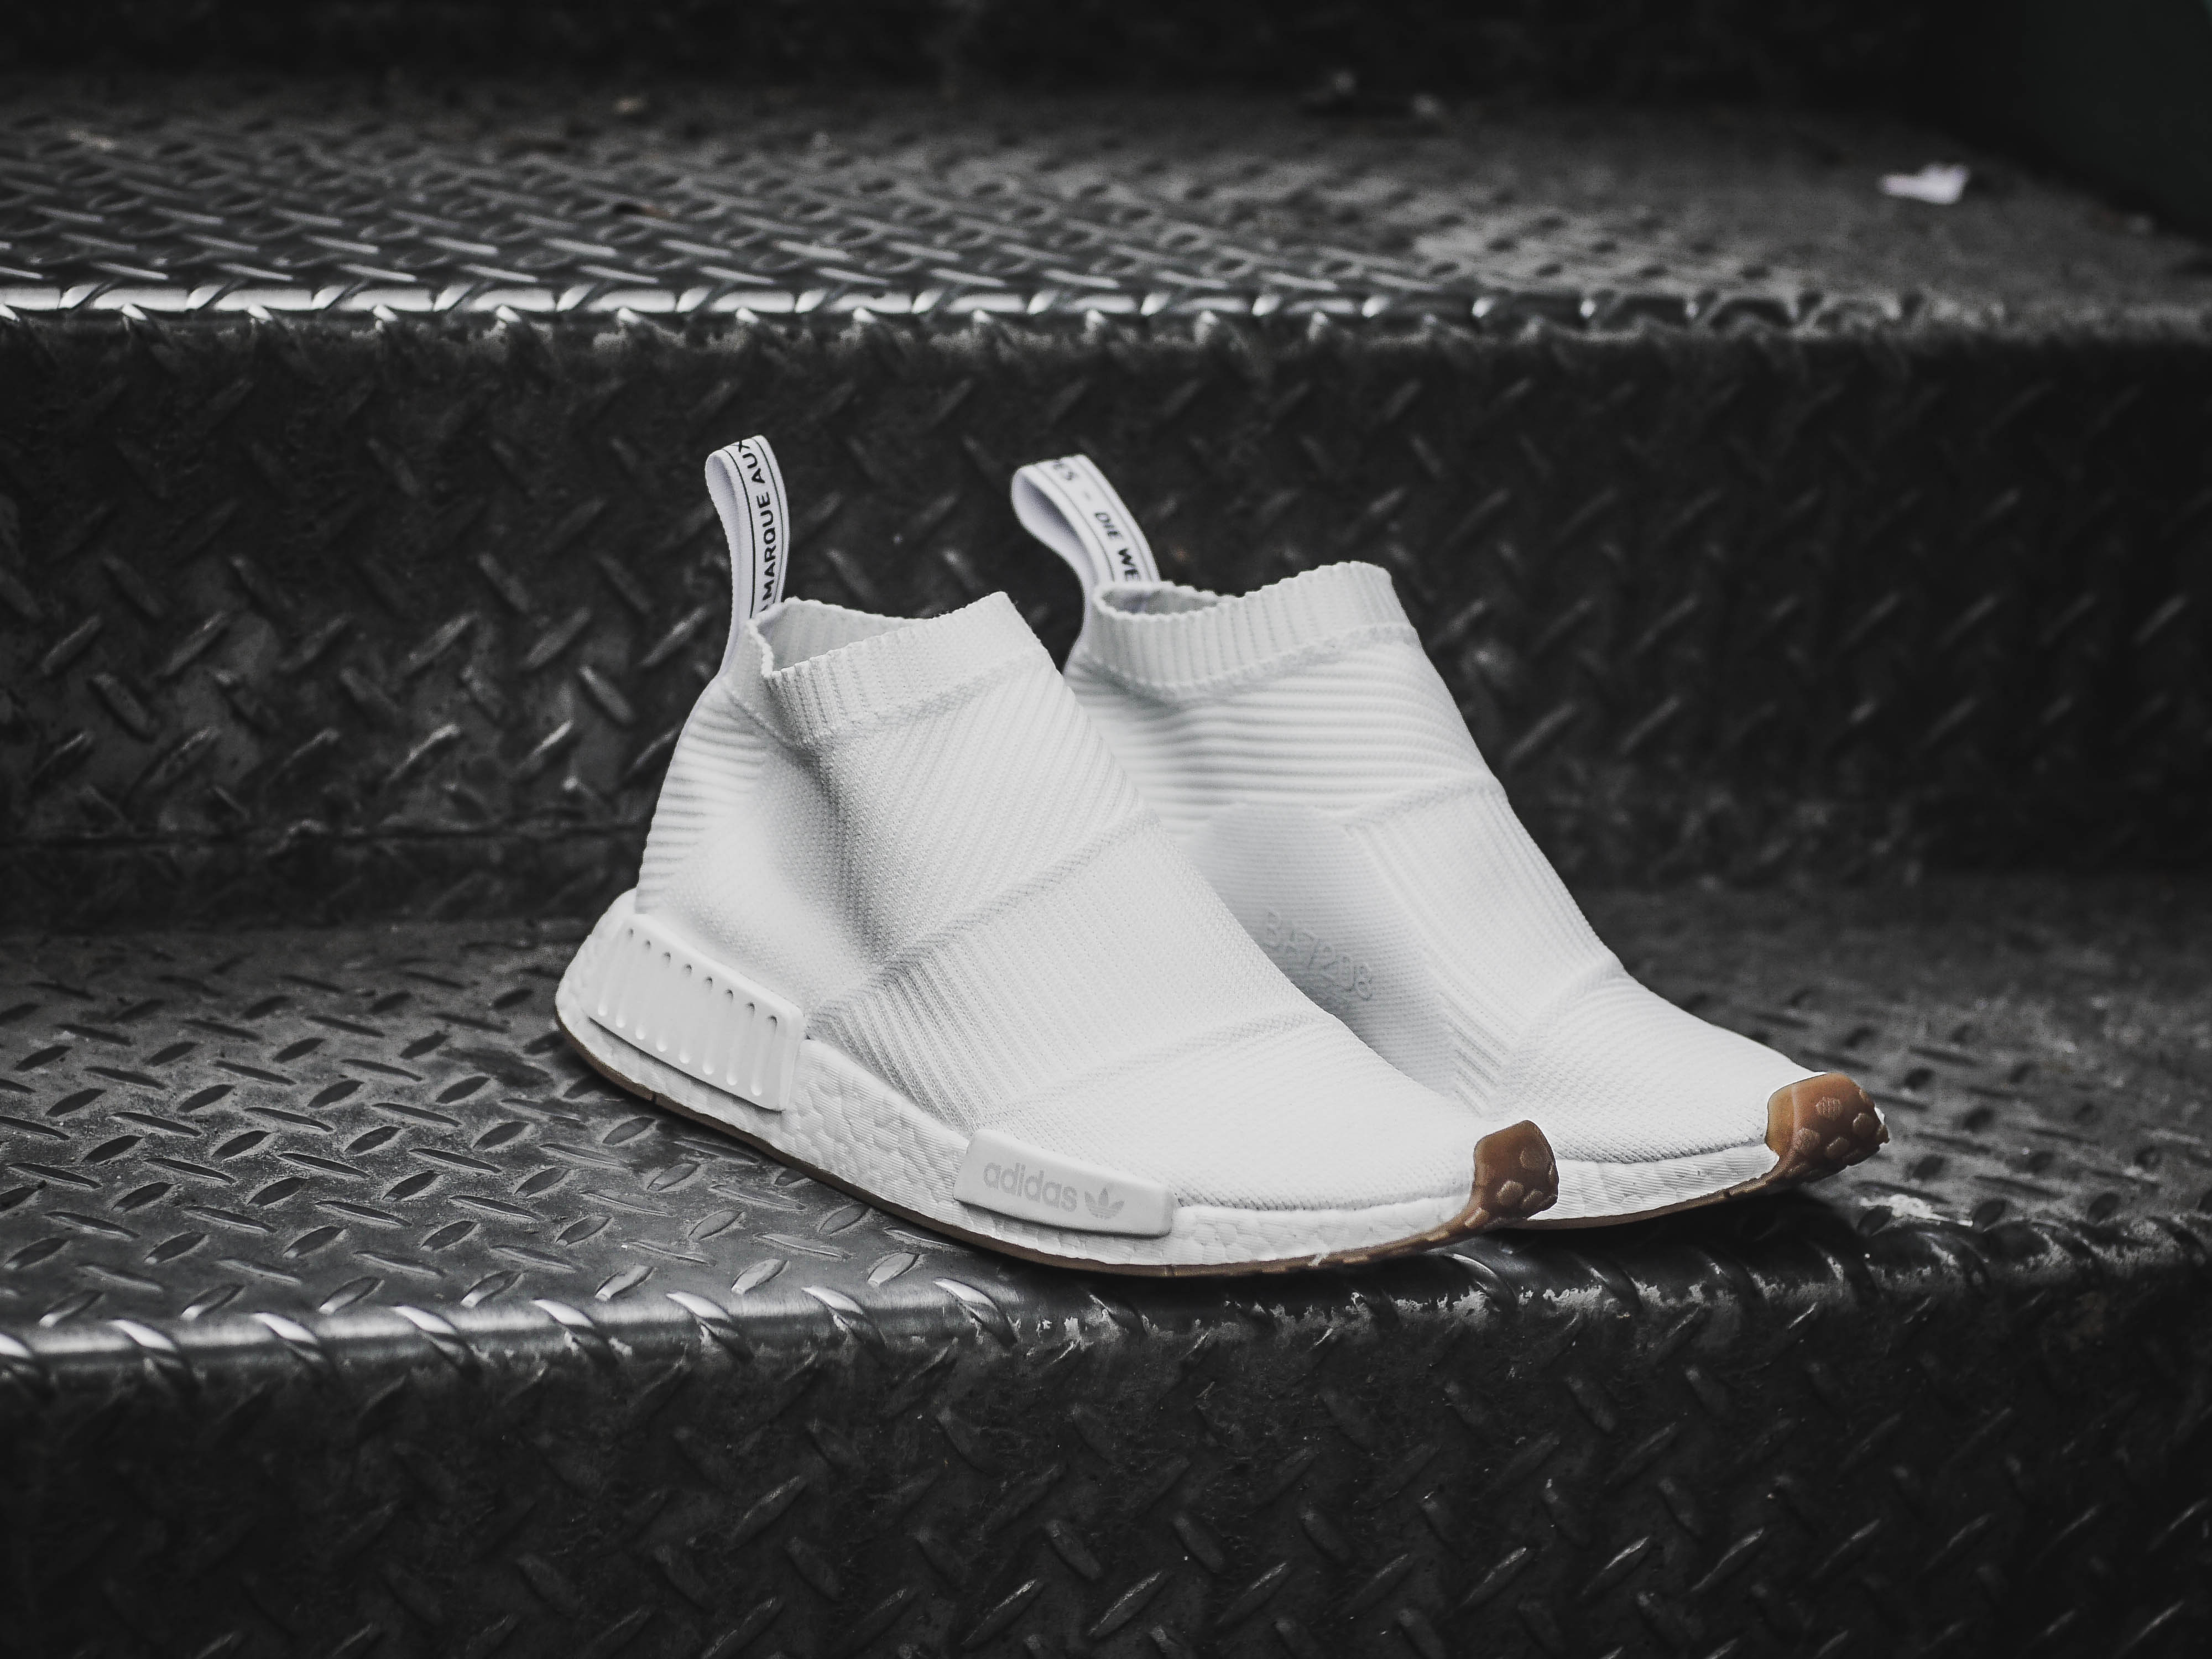 Adidas NMD City Sock Gum pack to release next month.